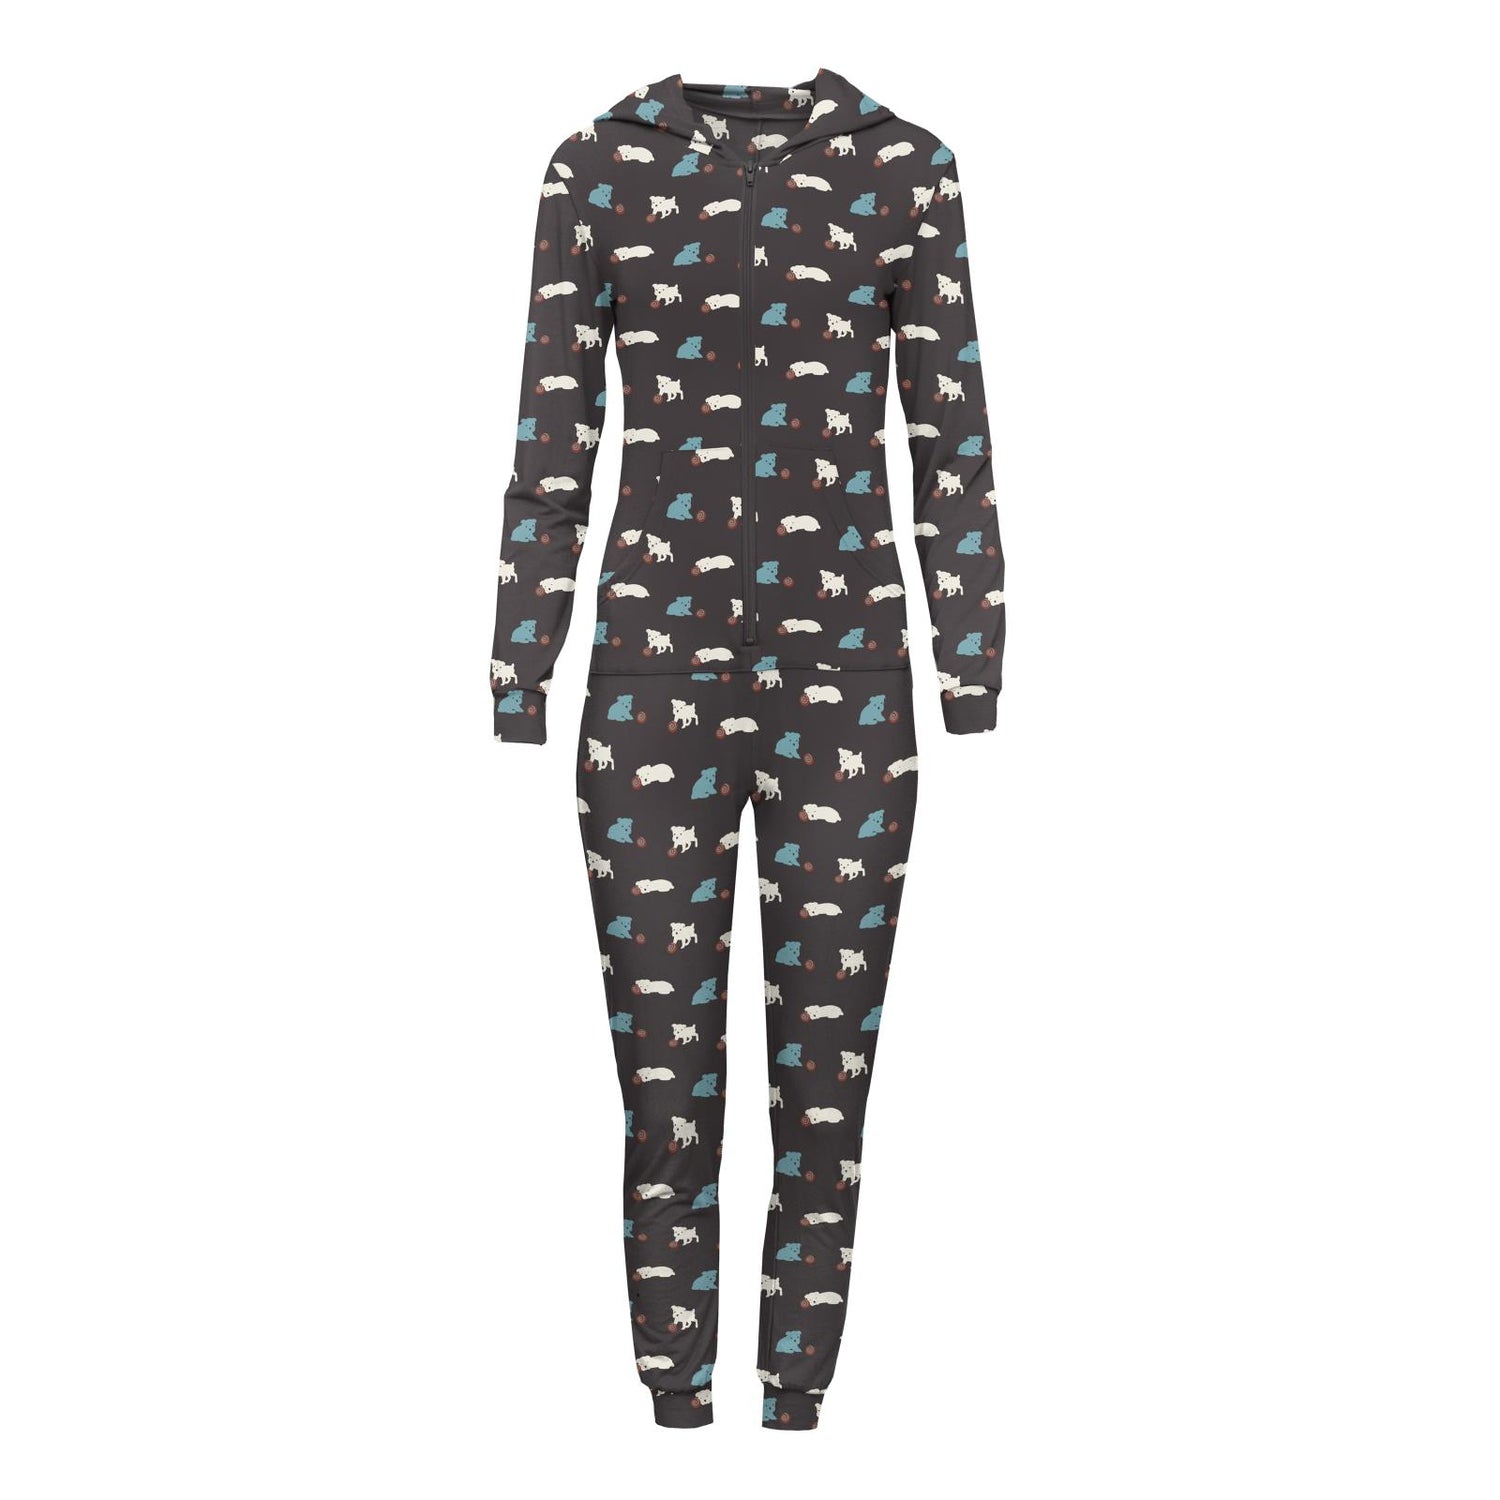 Women's Print Long Sleeve Jumpsuit with Hood in Midnight Puppy